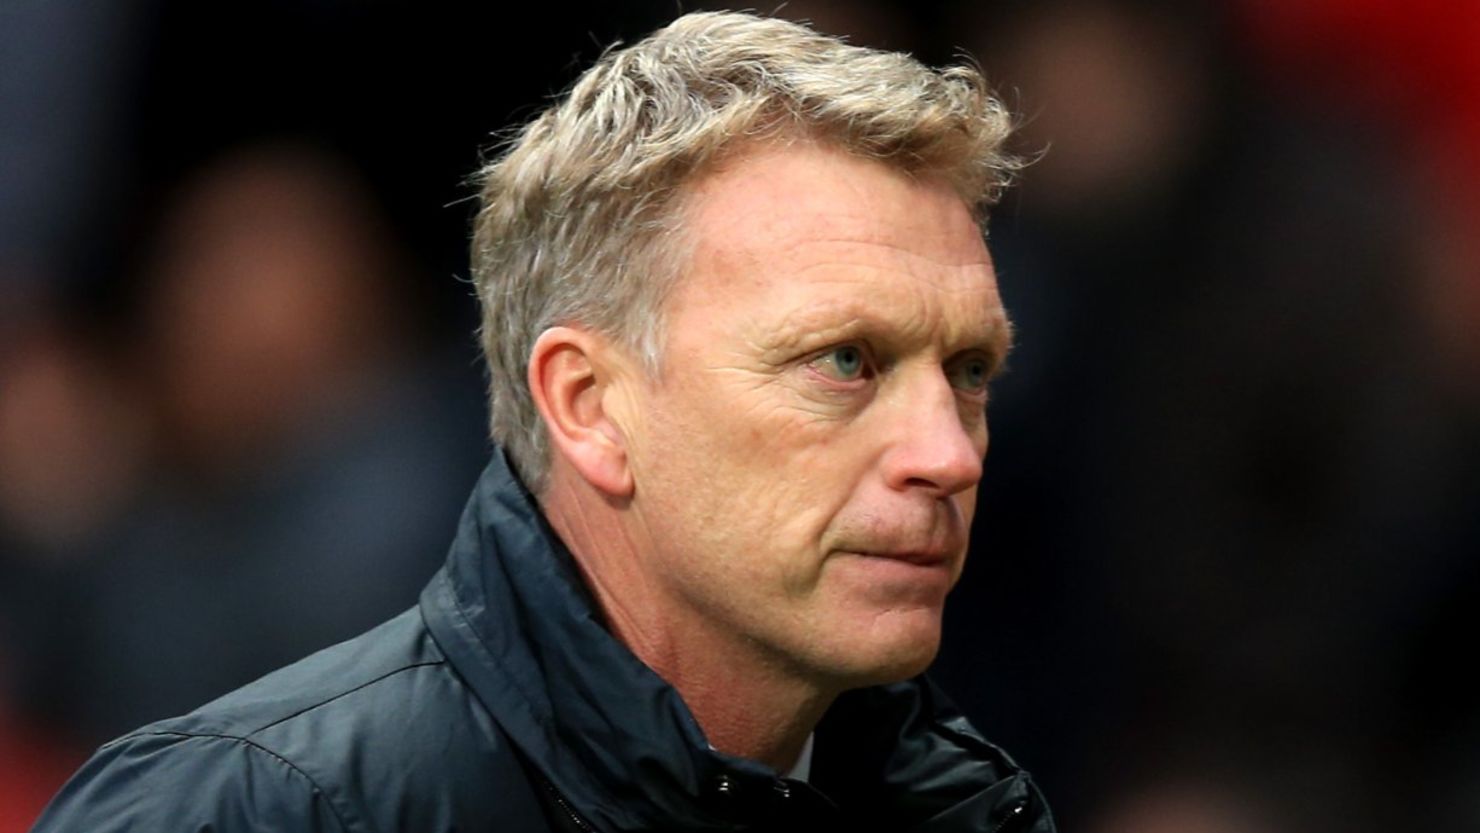 A dejected David Moyes trudges off after his Manchester United side suffer a 1-0 home defeat to Newcastle United. 